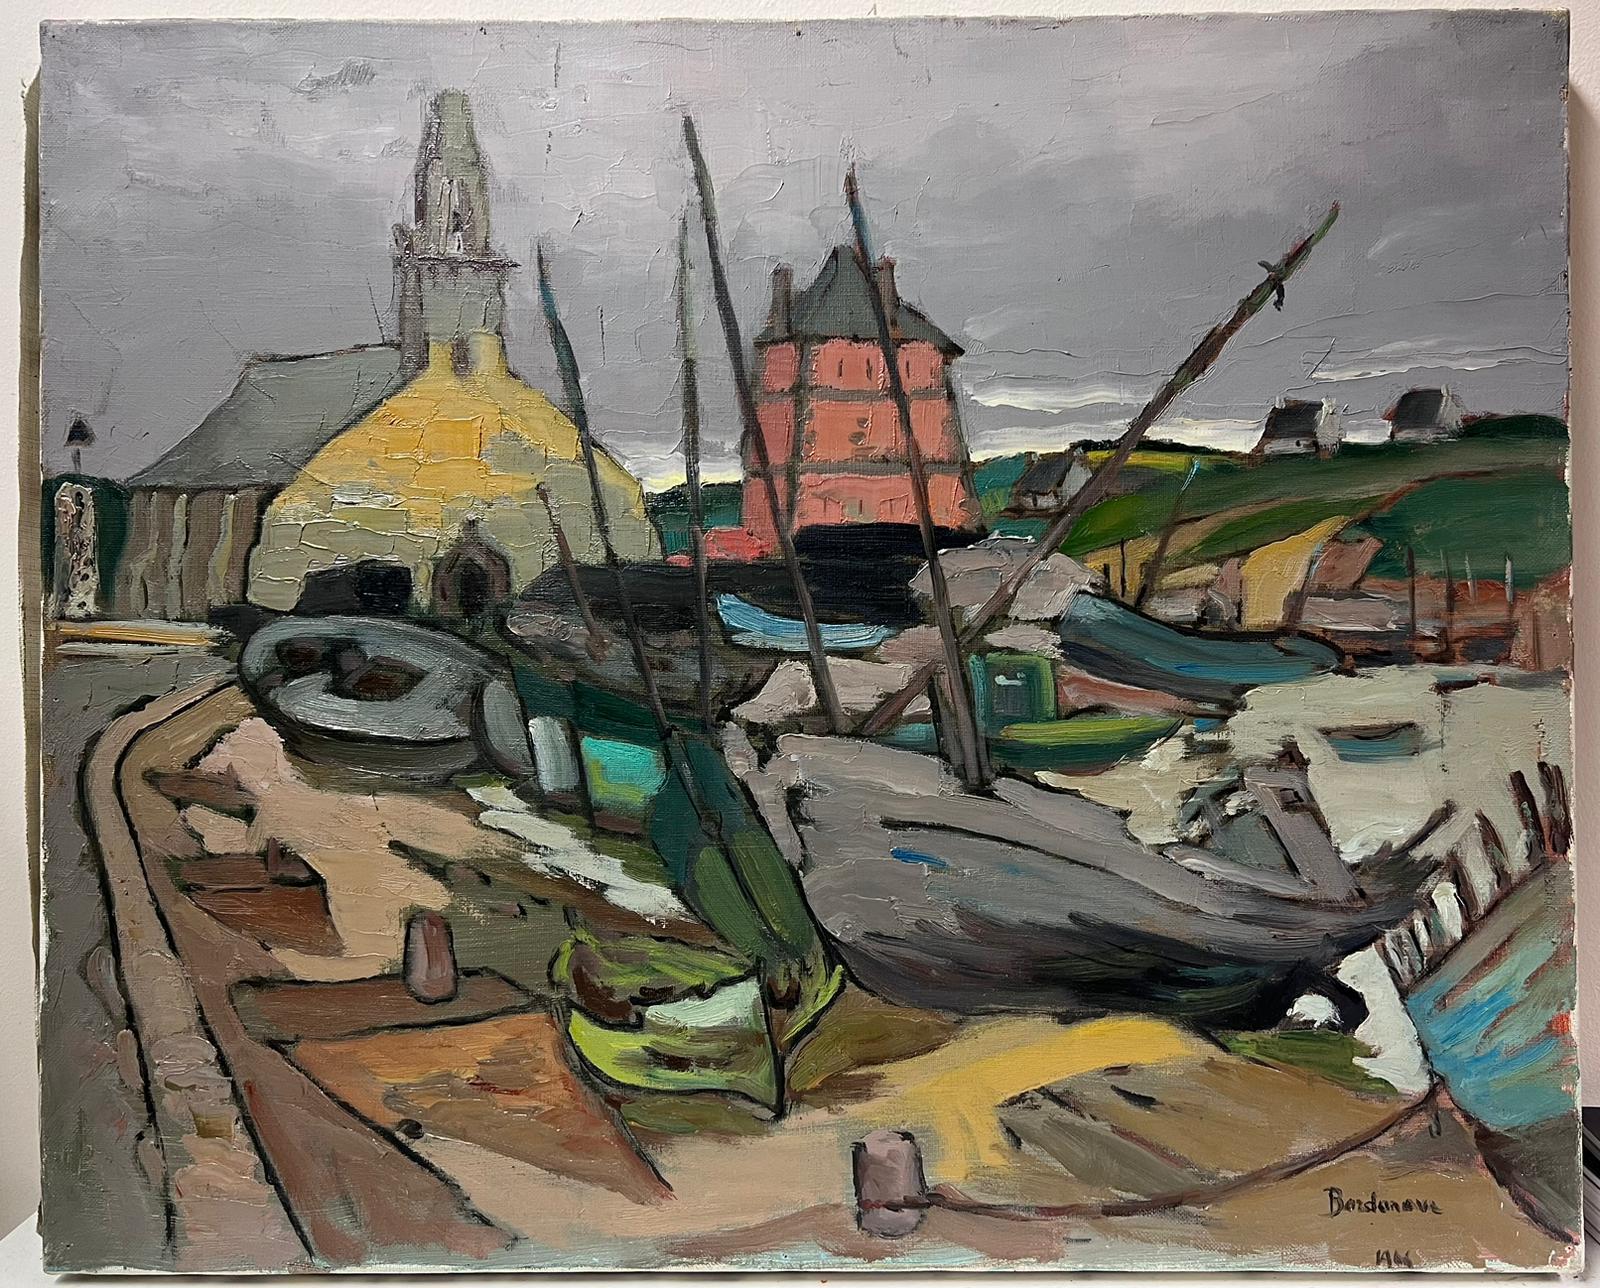 French Dockyard
by Georges Bordonave (French contemporary) 
dated 1966
signed oil painting on canvas, unframed
canvas: 18 x 21.75 inches
condition: very good
provenance: from a large private collection of this artists work, western Paris, France. 